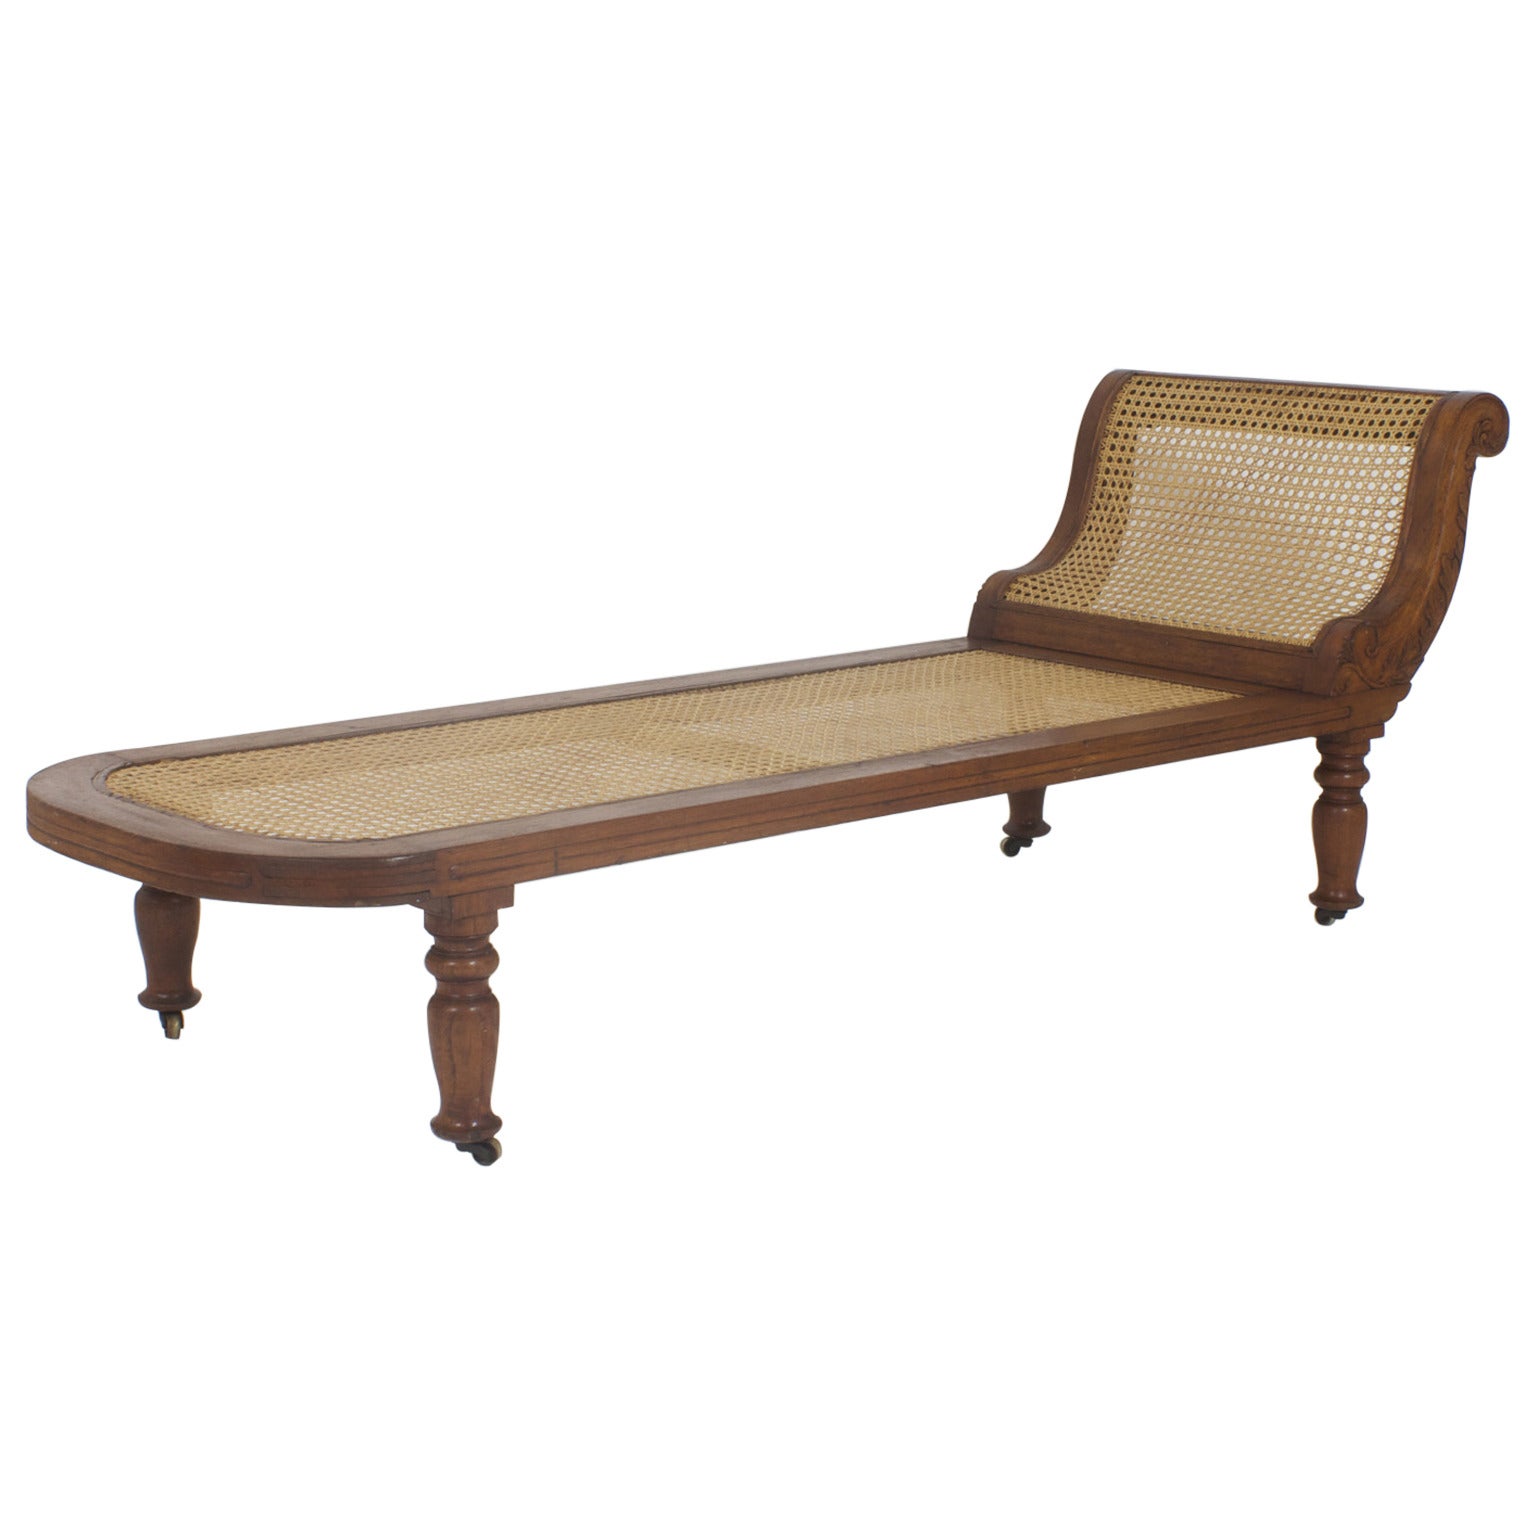 19th Century West Indian Chaise Longue